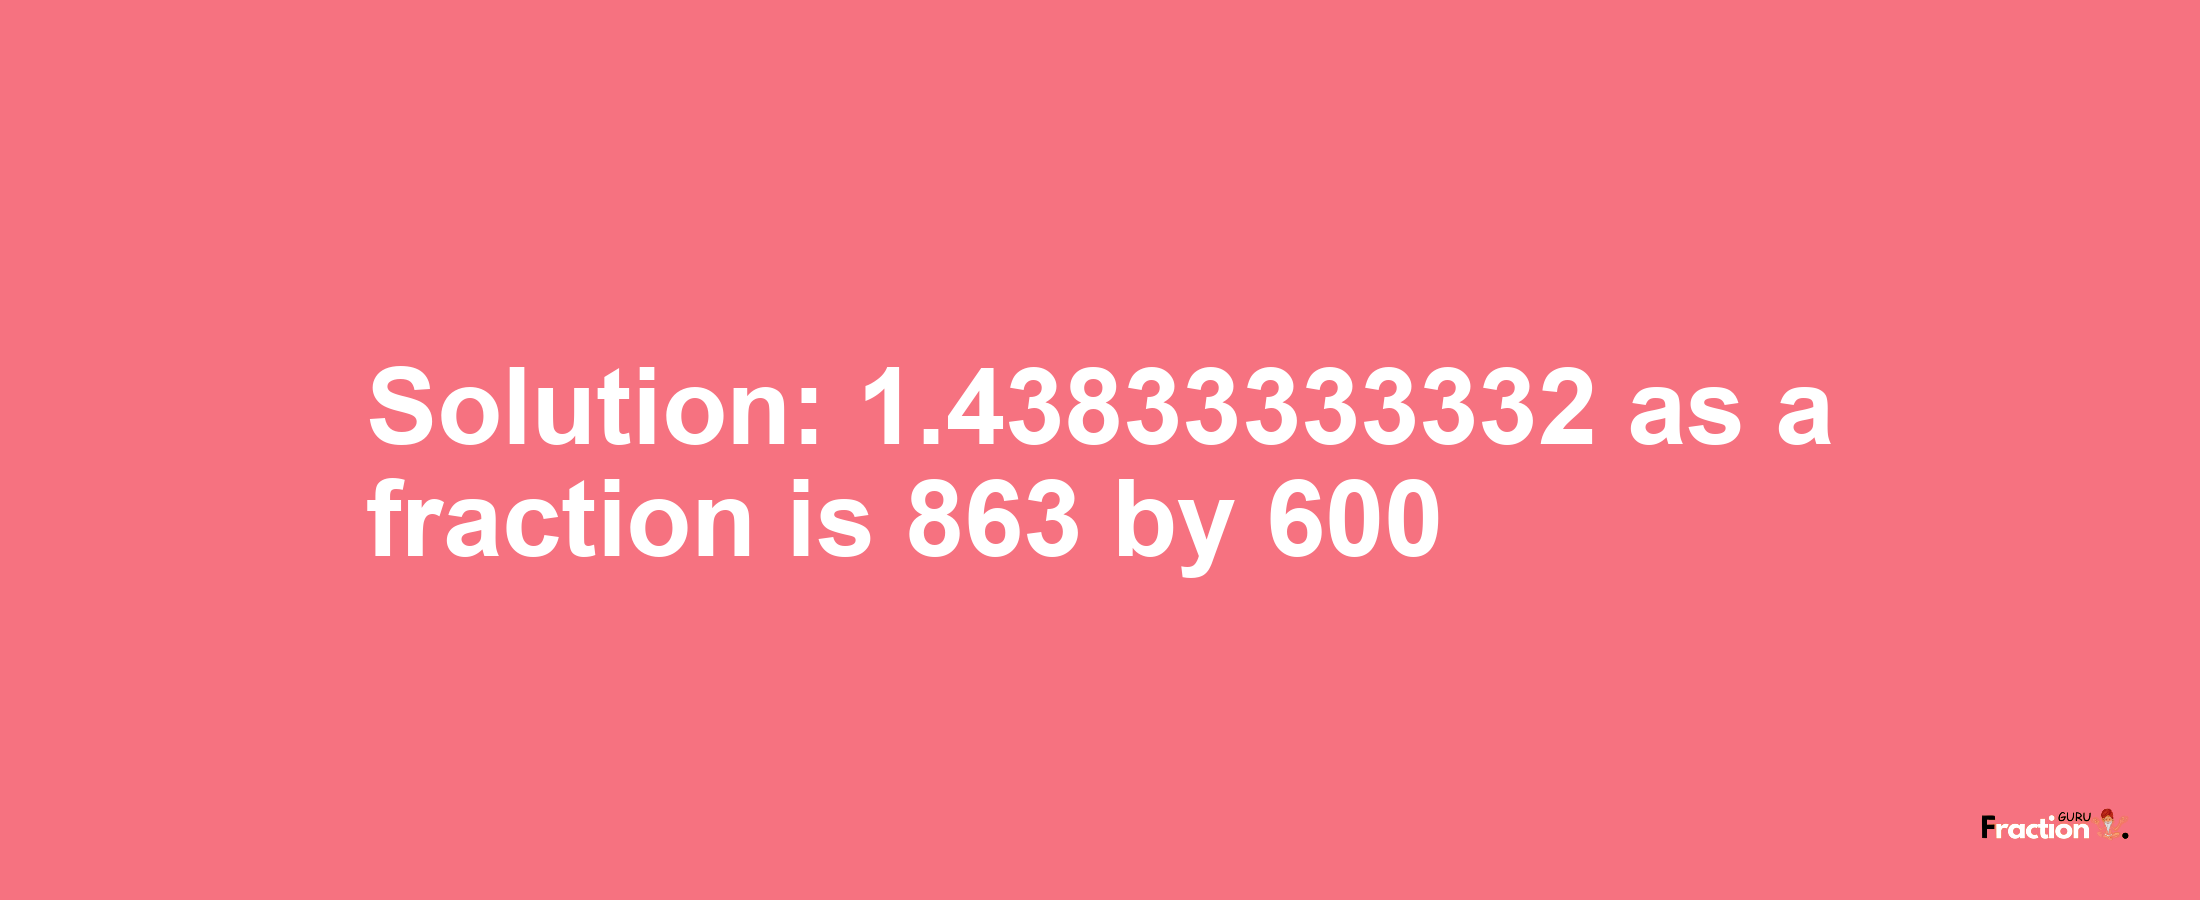 Solution:1.43833333332 as a fraction is 863/600